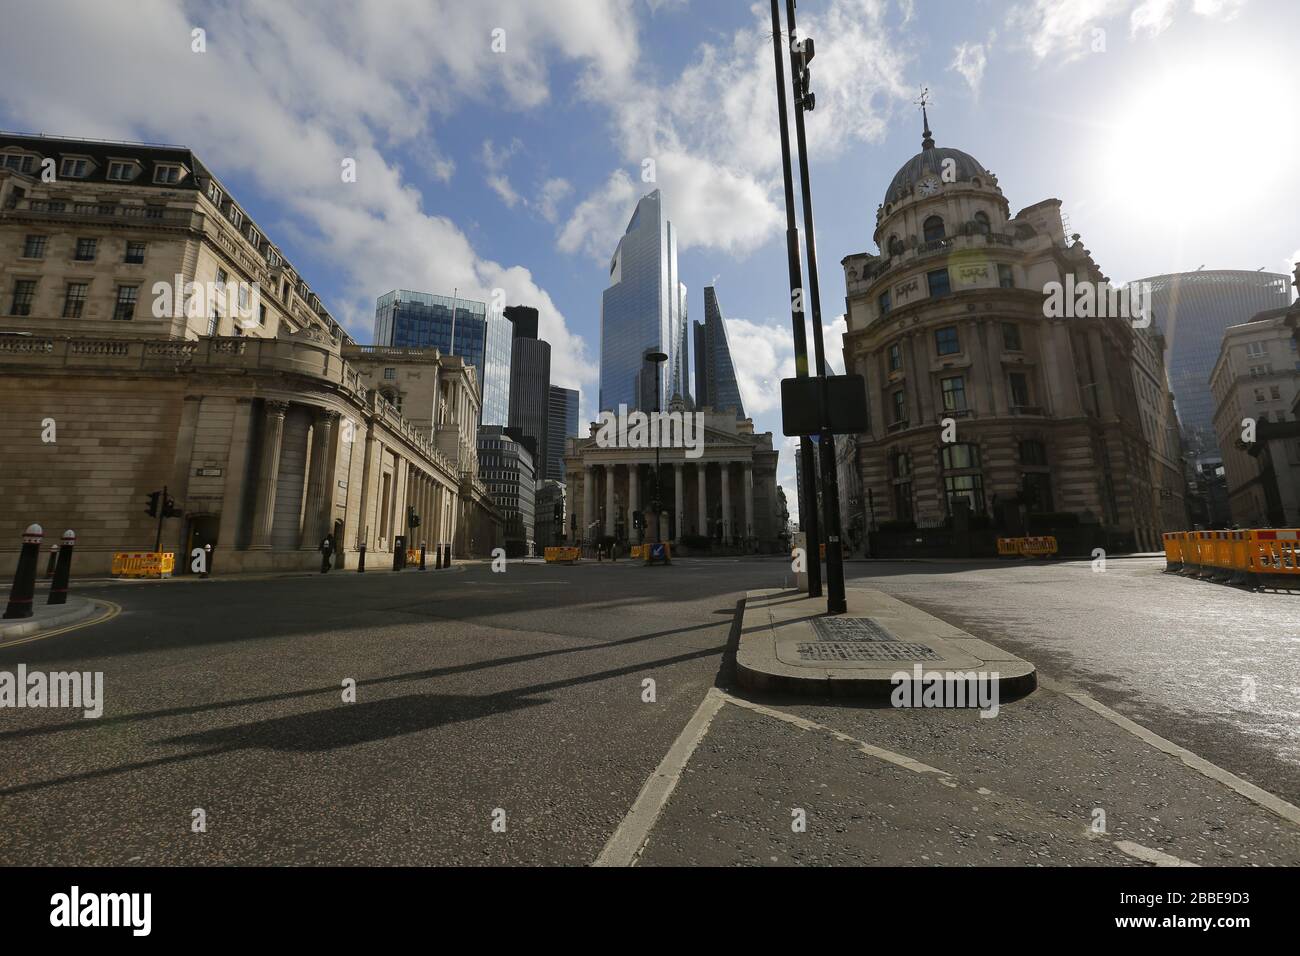 London,UK, 31st, Mar, 2020, Sunny day at Bank of England and nearby empty streets during COVID-19 pandemic outbreak, Credit: AM24/Alamy Live News Stock Photo